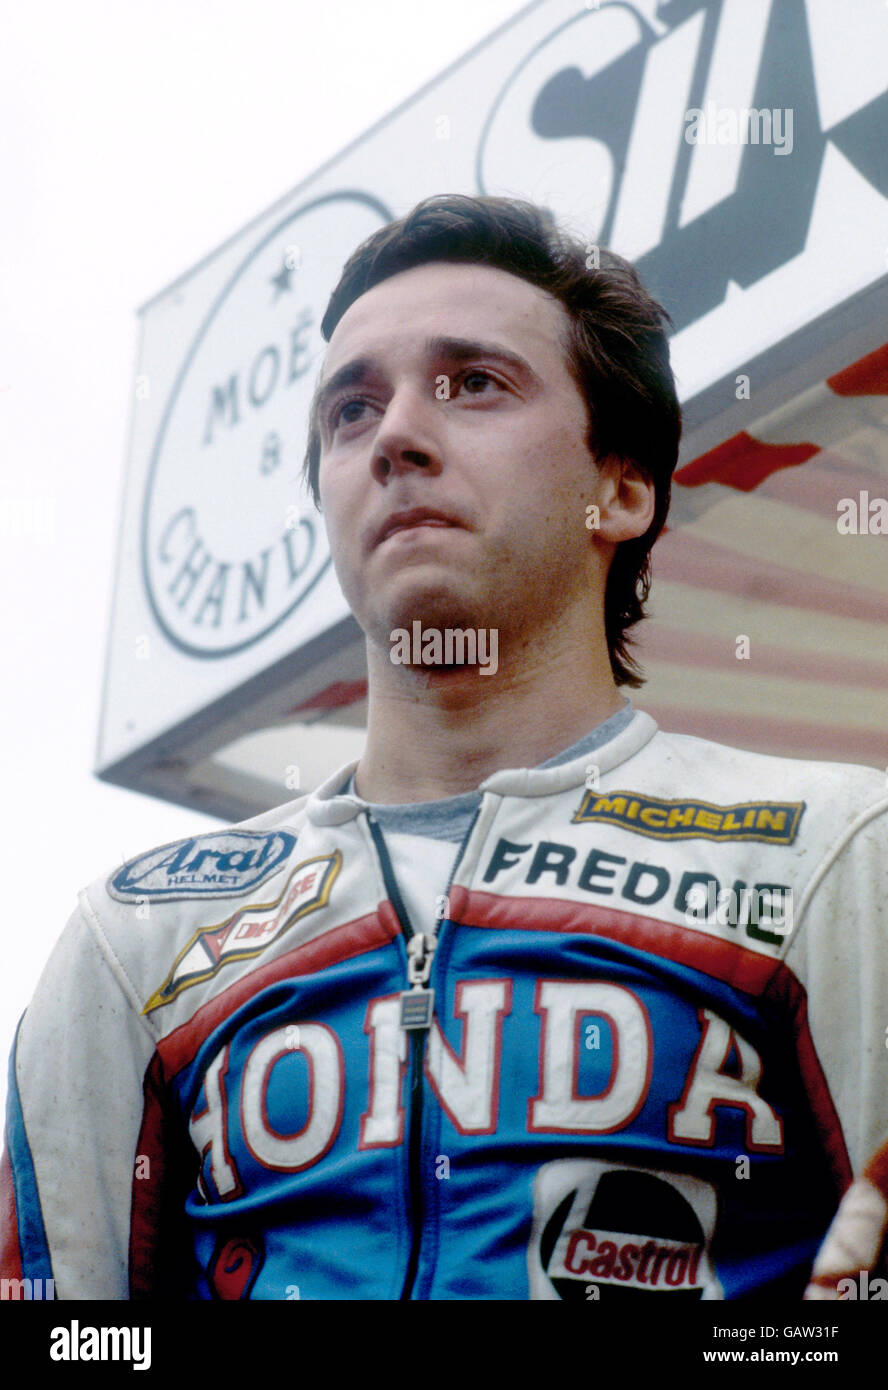 American rider Freddie Spencer, known by the nickname 'Fast Freddie', who became the youngest rider to win the 500cc World Championship in 1983, when he defeated fellow American Kenny Roberts in one of the most tense and thrilling title chases in racing bike history. Stock Photo